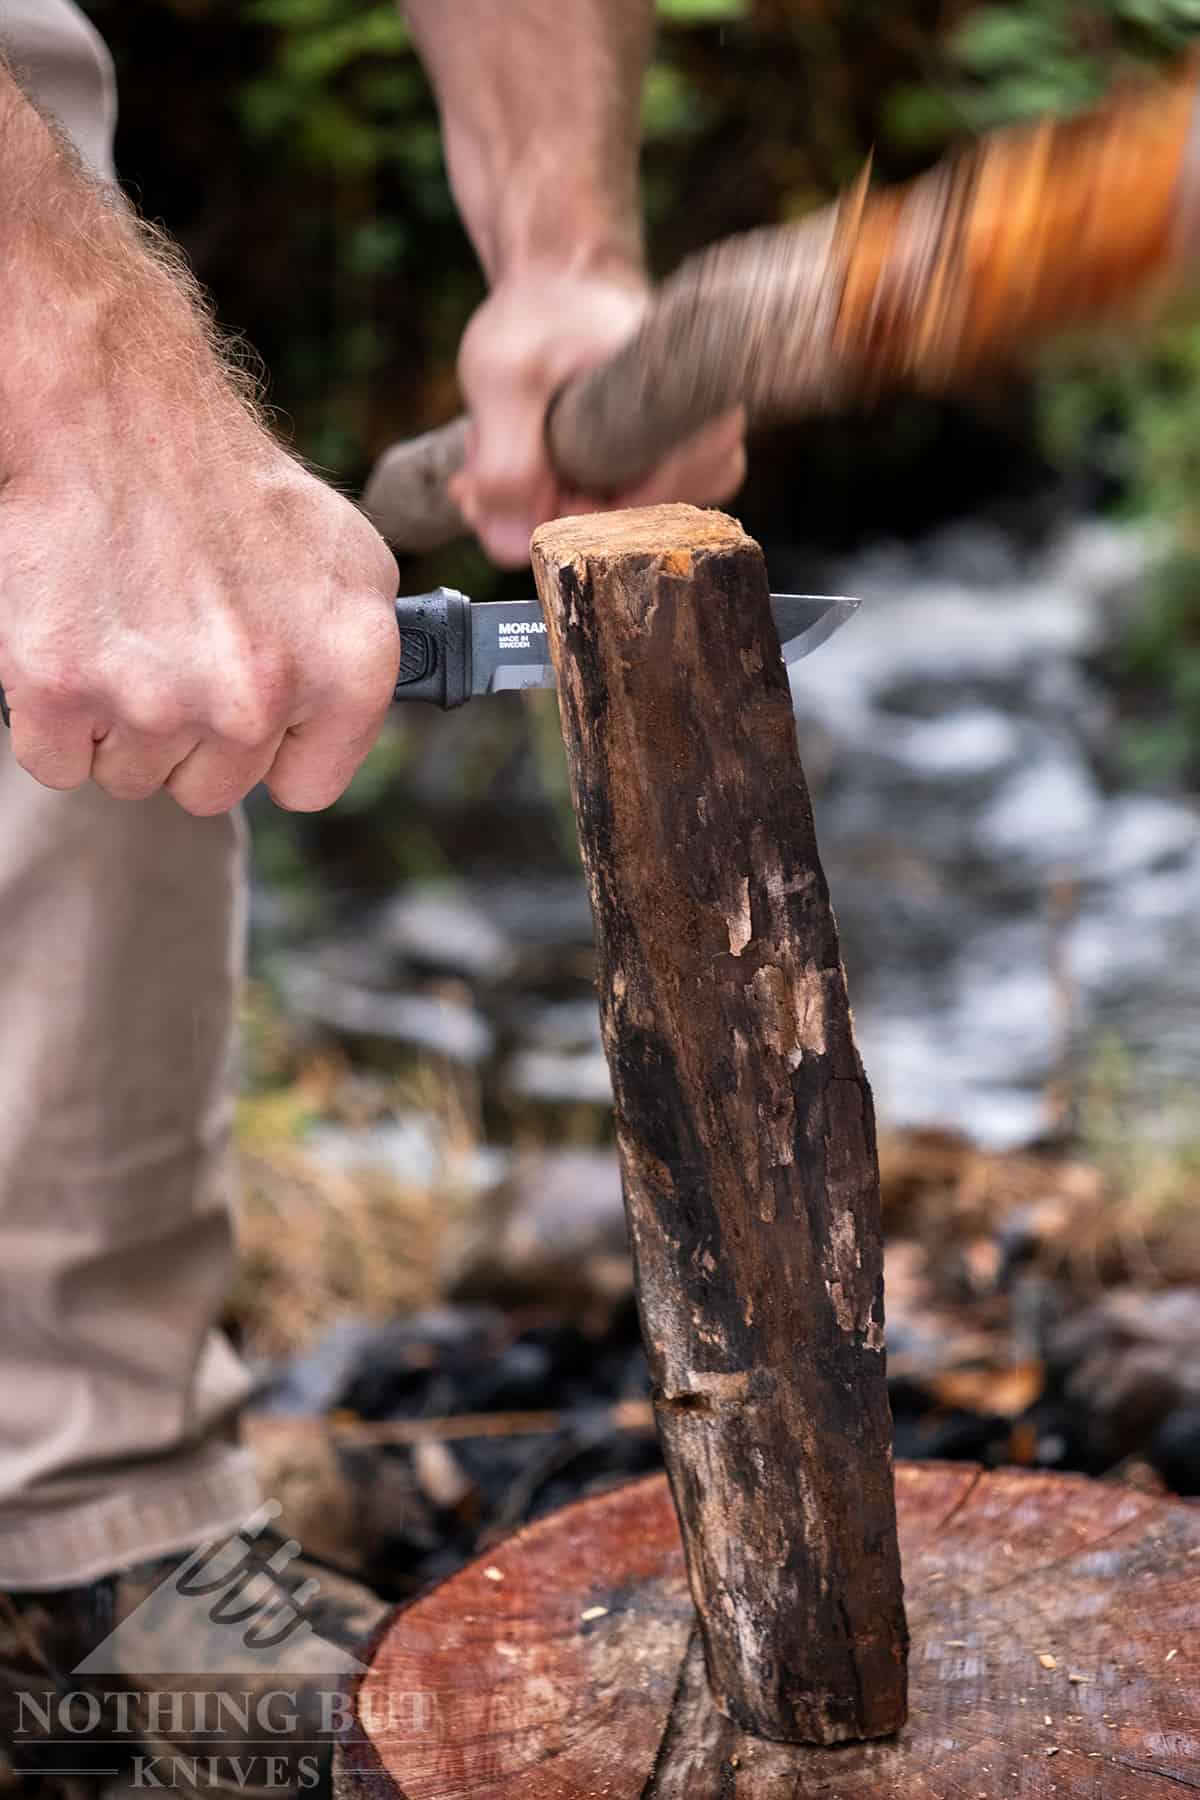 The versatility of the Garberg design allows it to be used for hardcore bushcraft tasks or everyday household activities. 